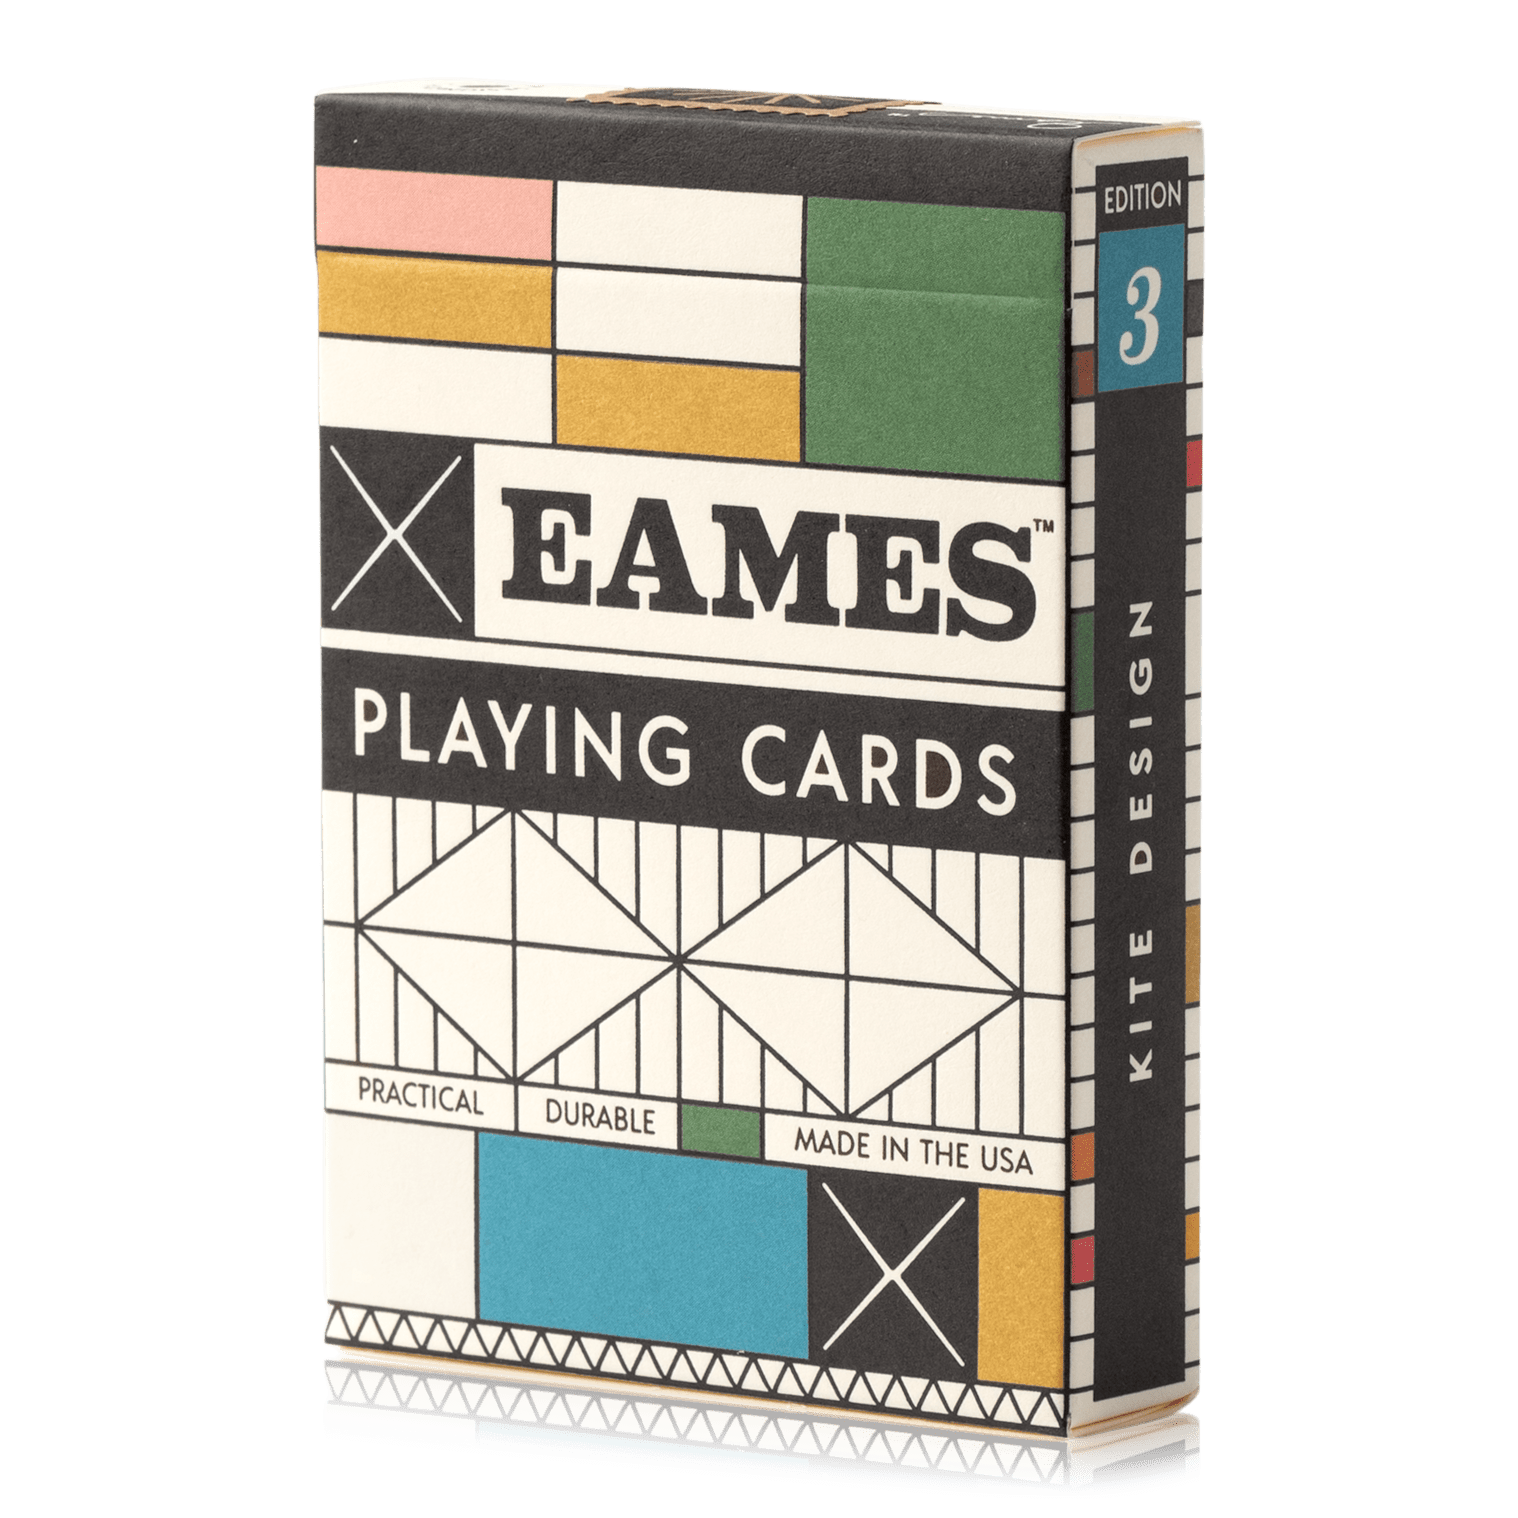 Eames "Kite Design" Playing Cards